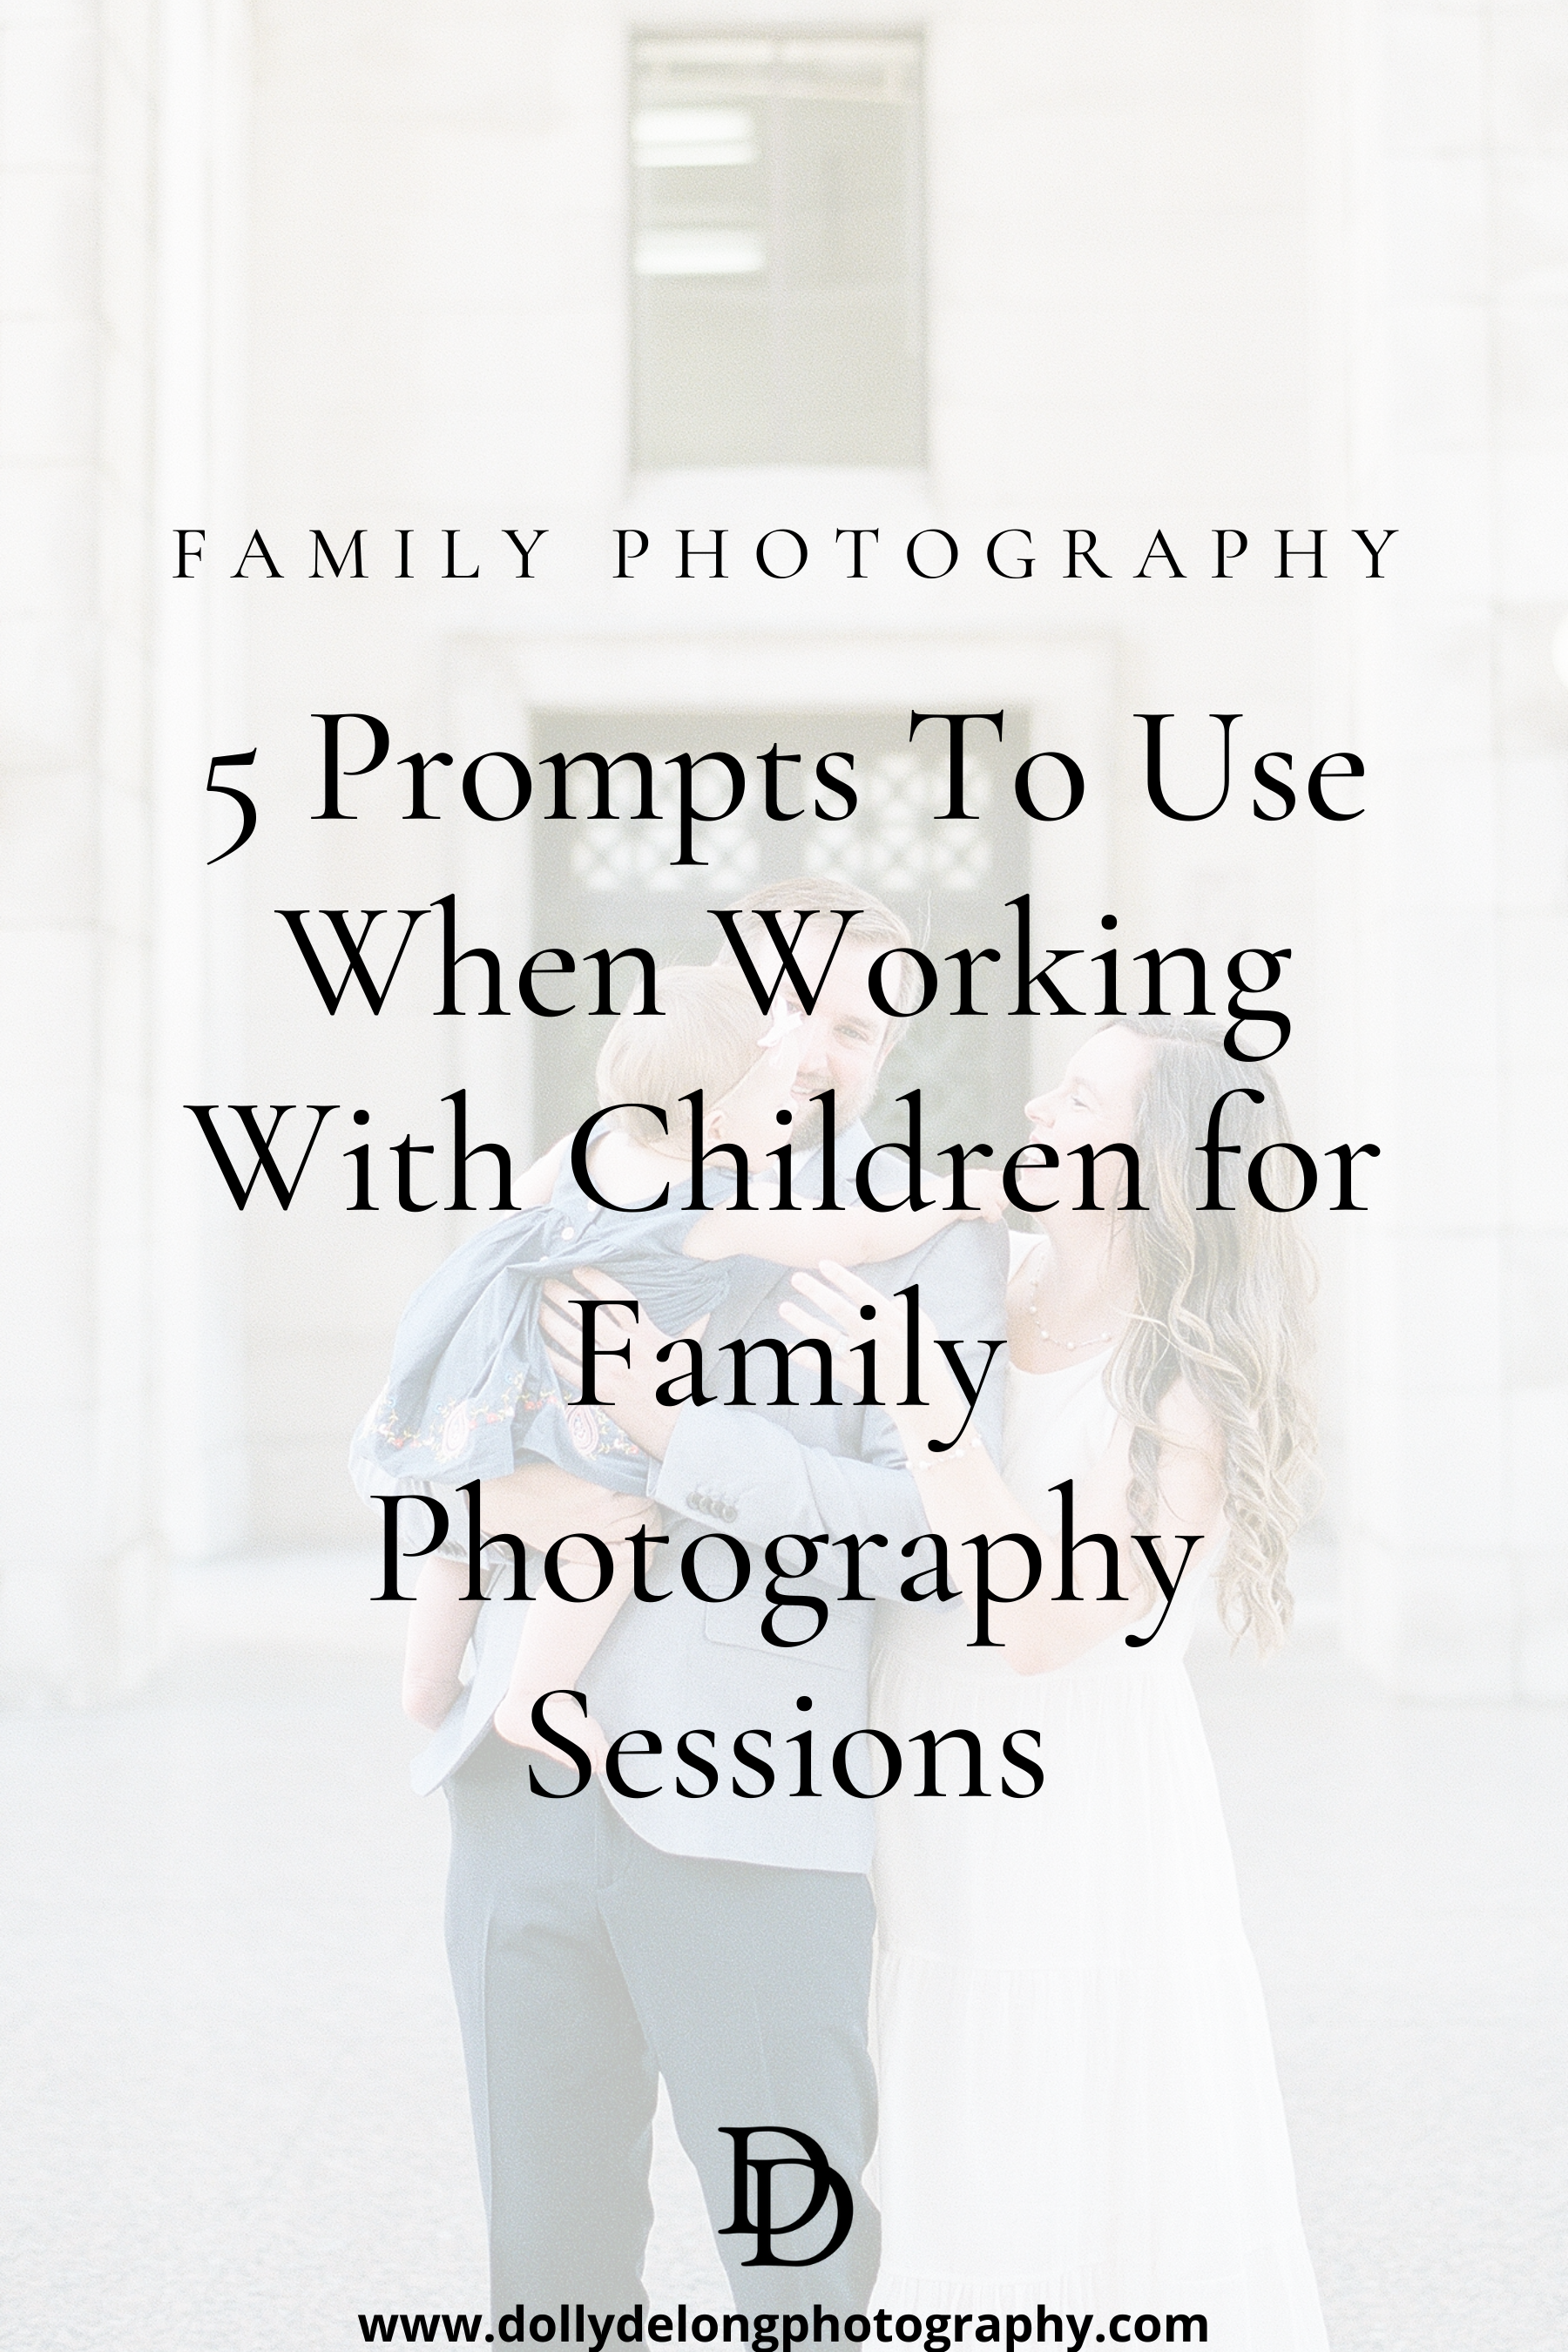 5 prompts to use when working with children for family photography by Nashville family photographer Dolly DeLong Photography